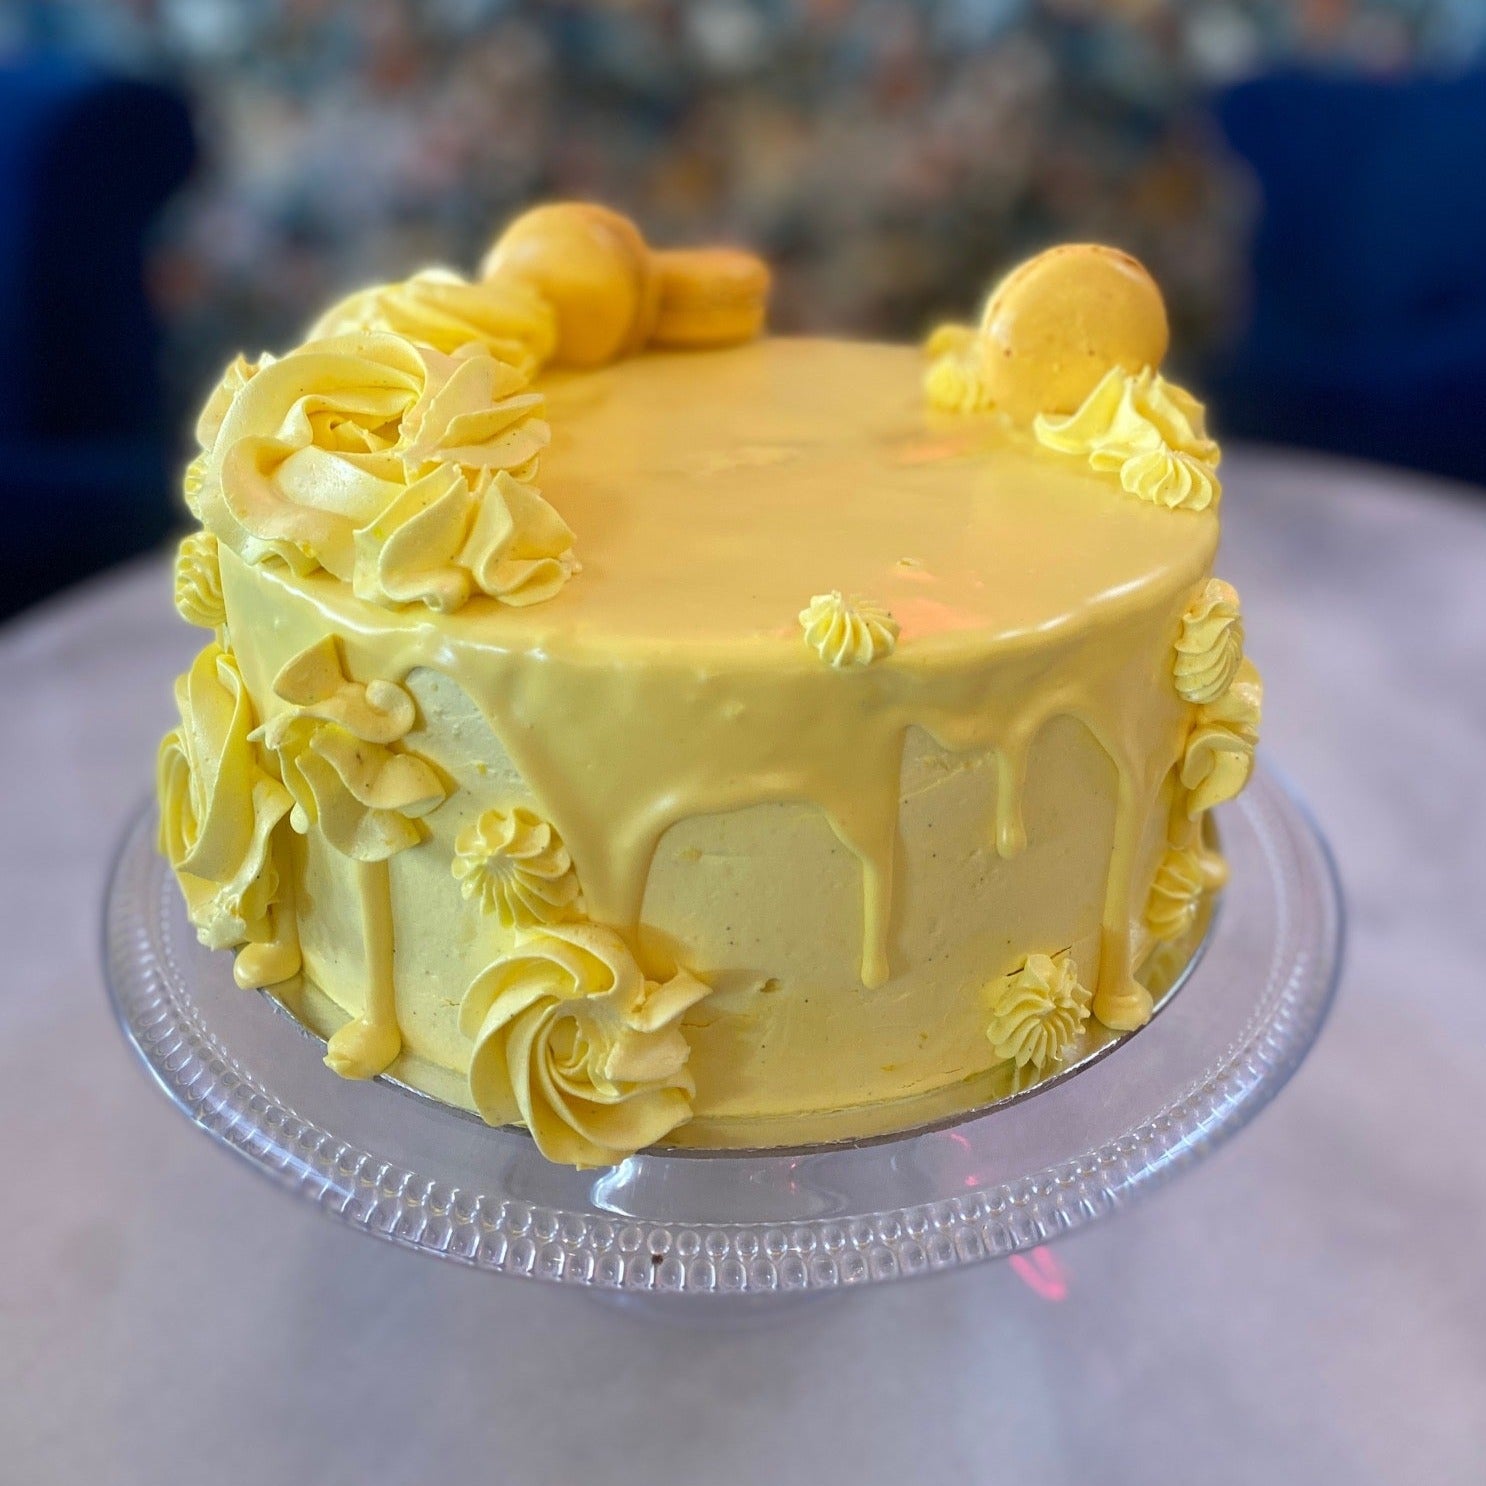 Yellow 2 layer cake from Sweet Creations in Blenheim, NZ